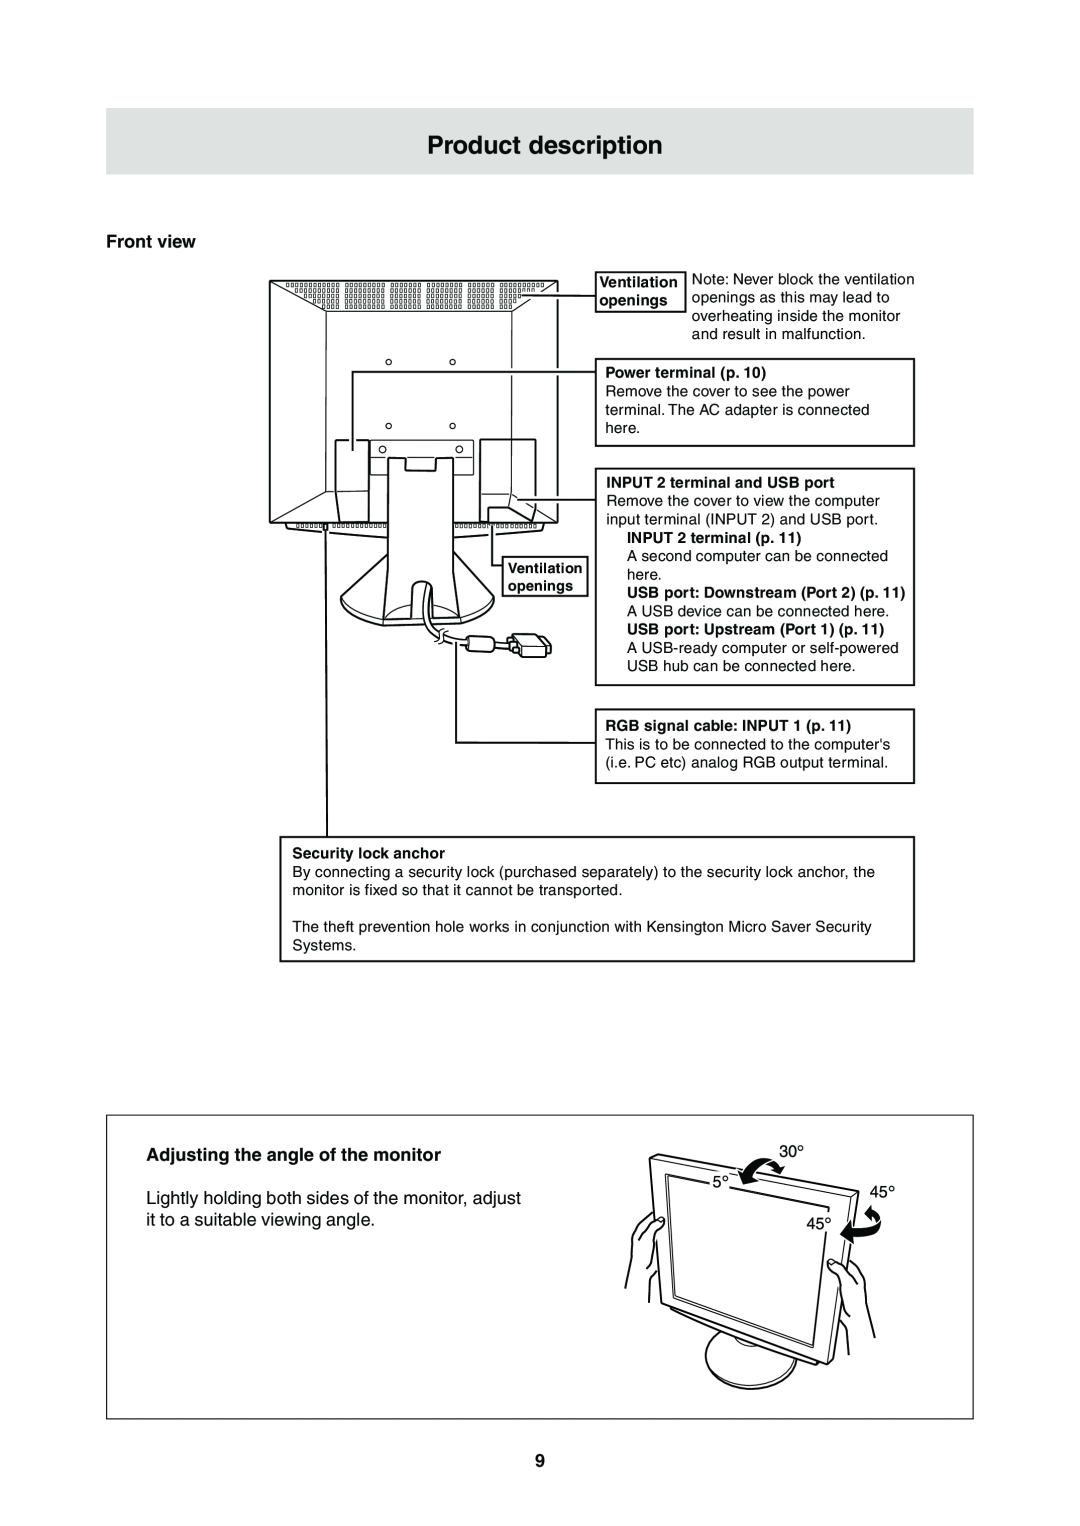 Sharp LL-T2000A operation manual Product description, Adjusting the angle of the monitor, Front view 